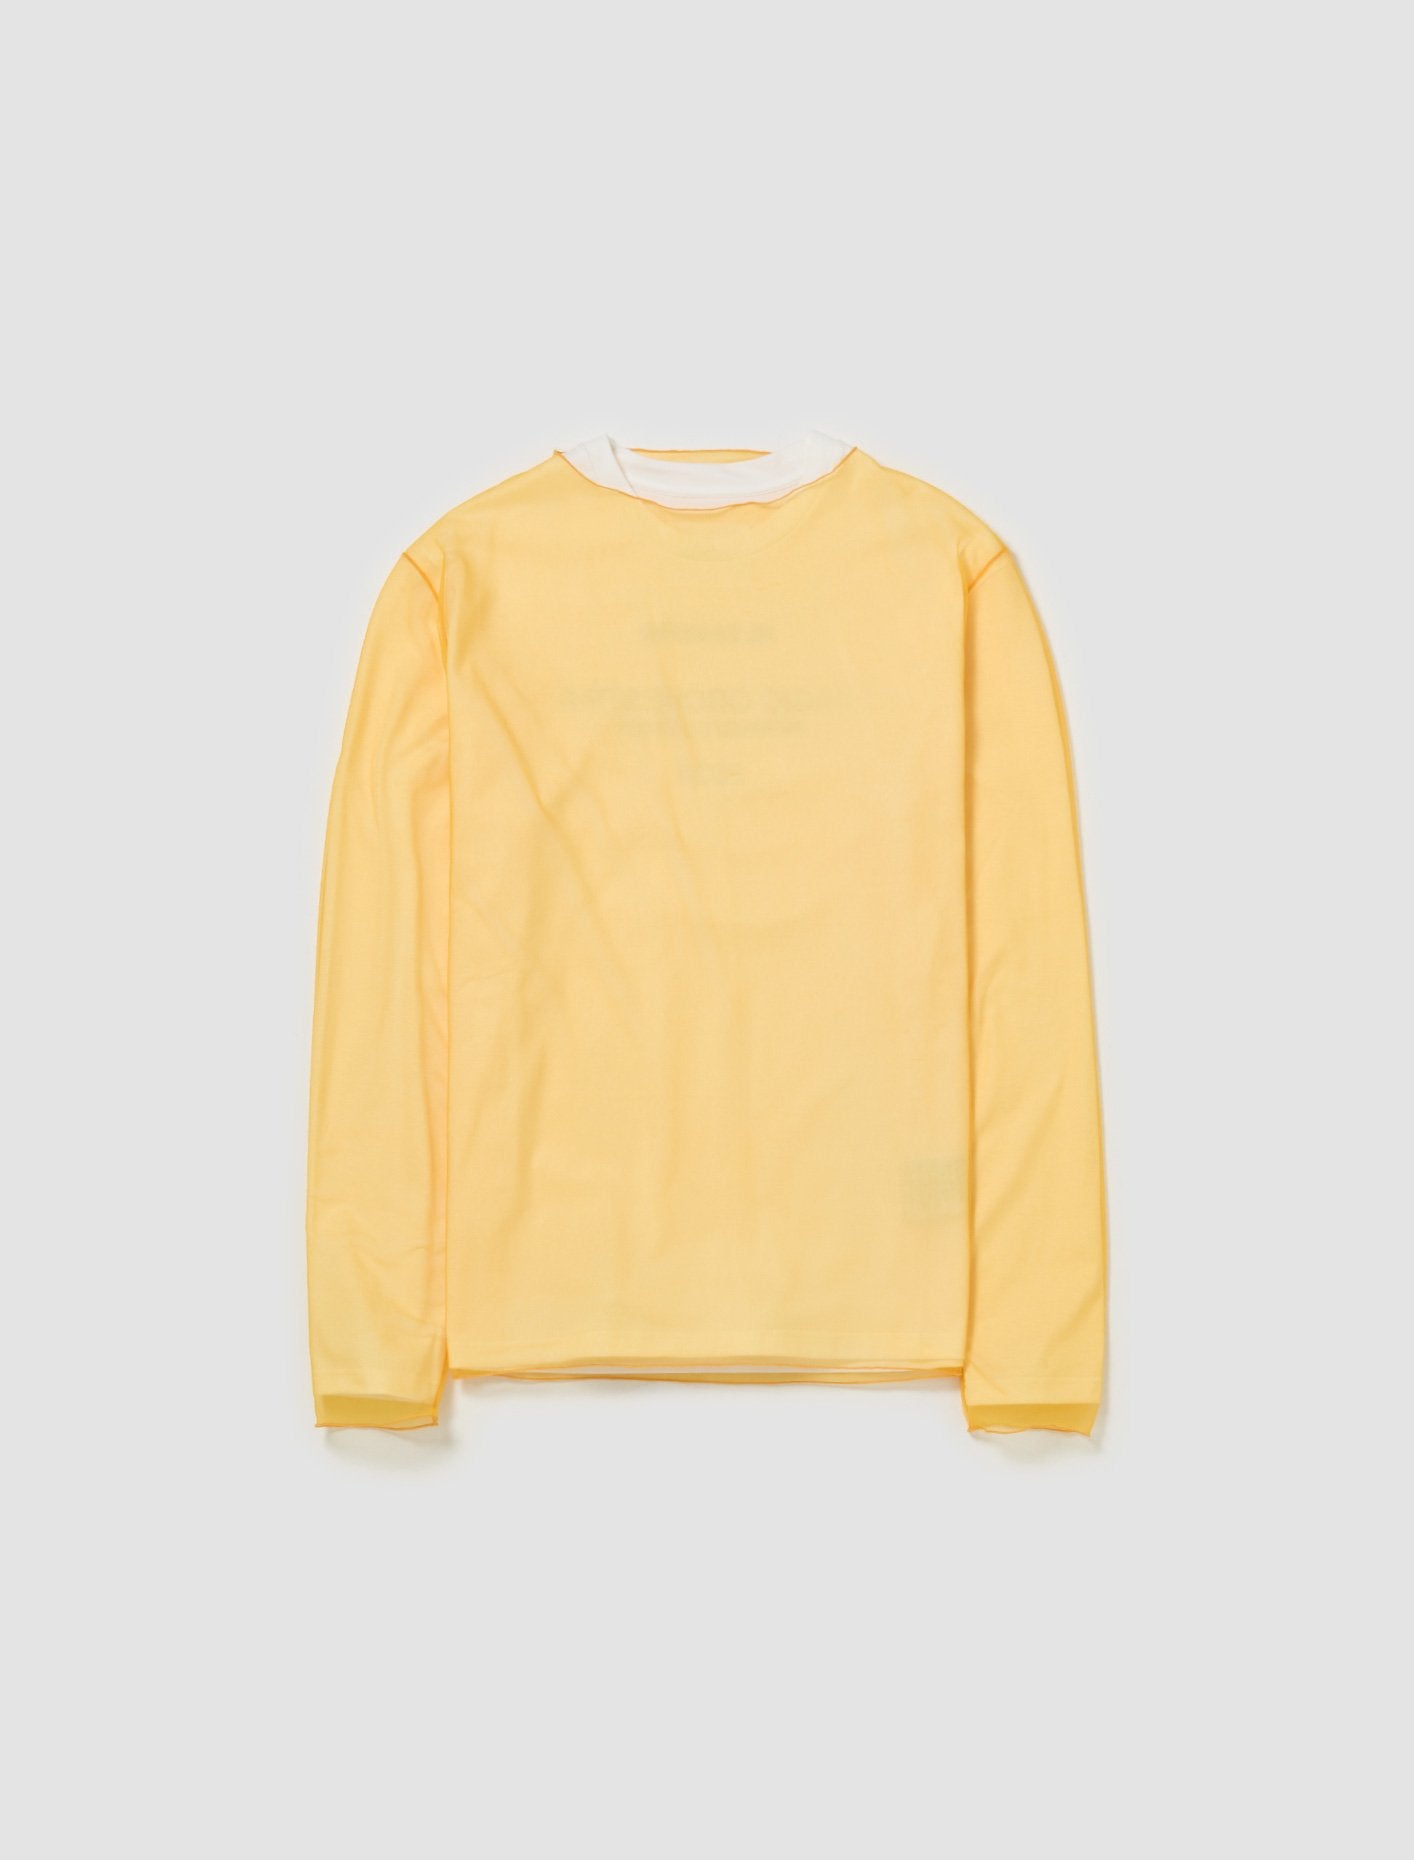 Double Layer Long Sleeved Top in Mango